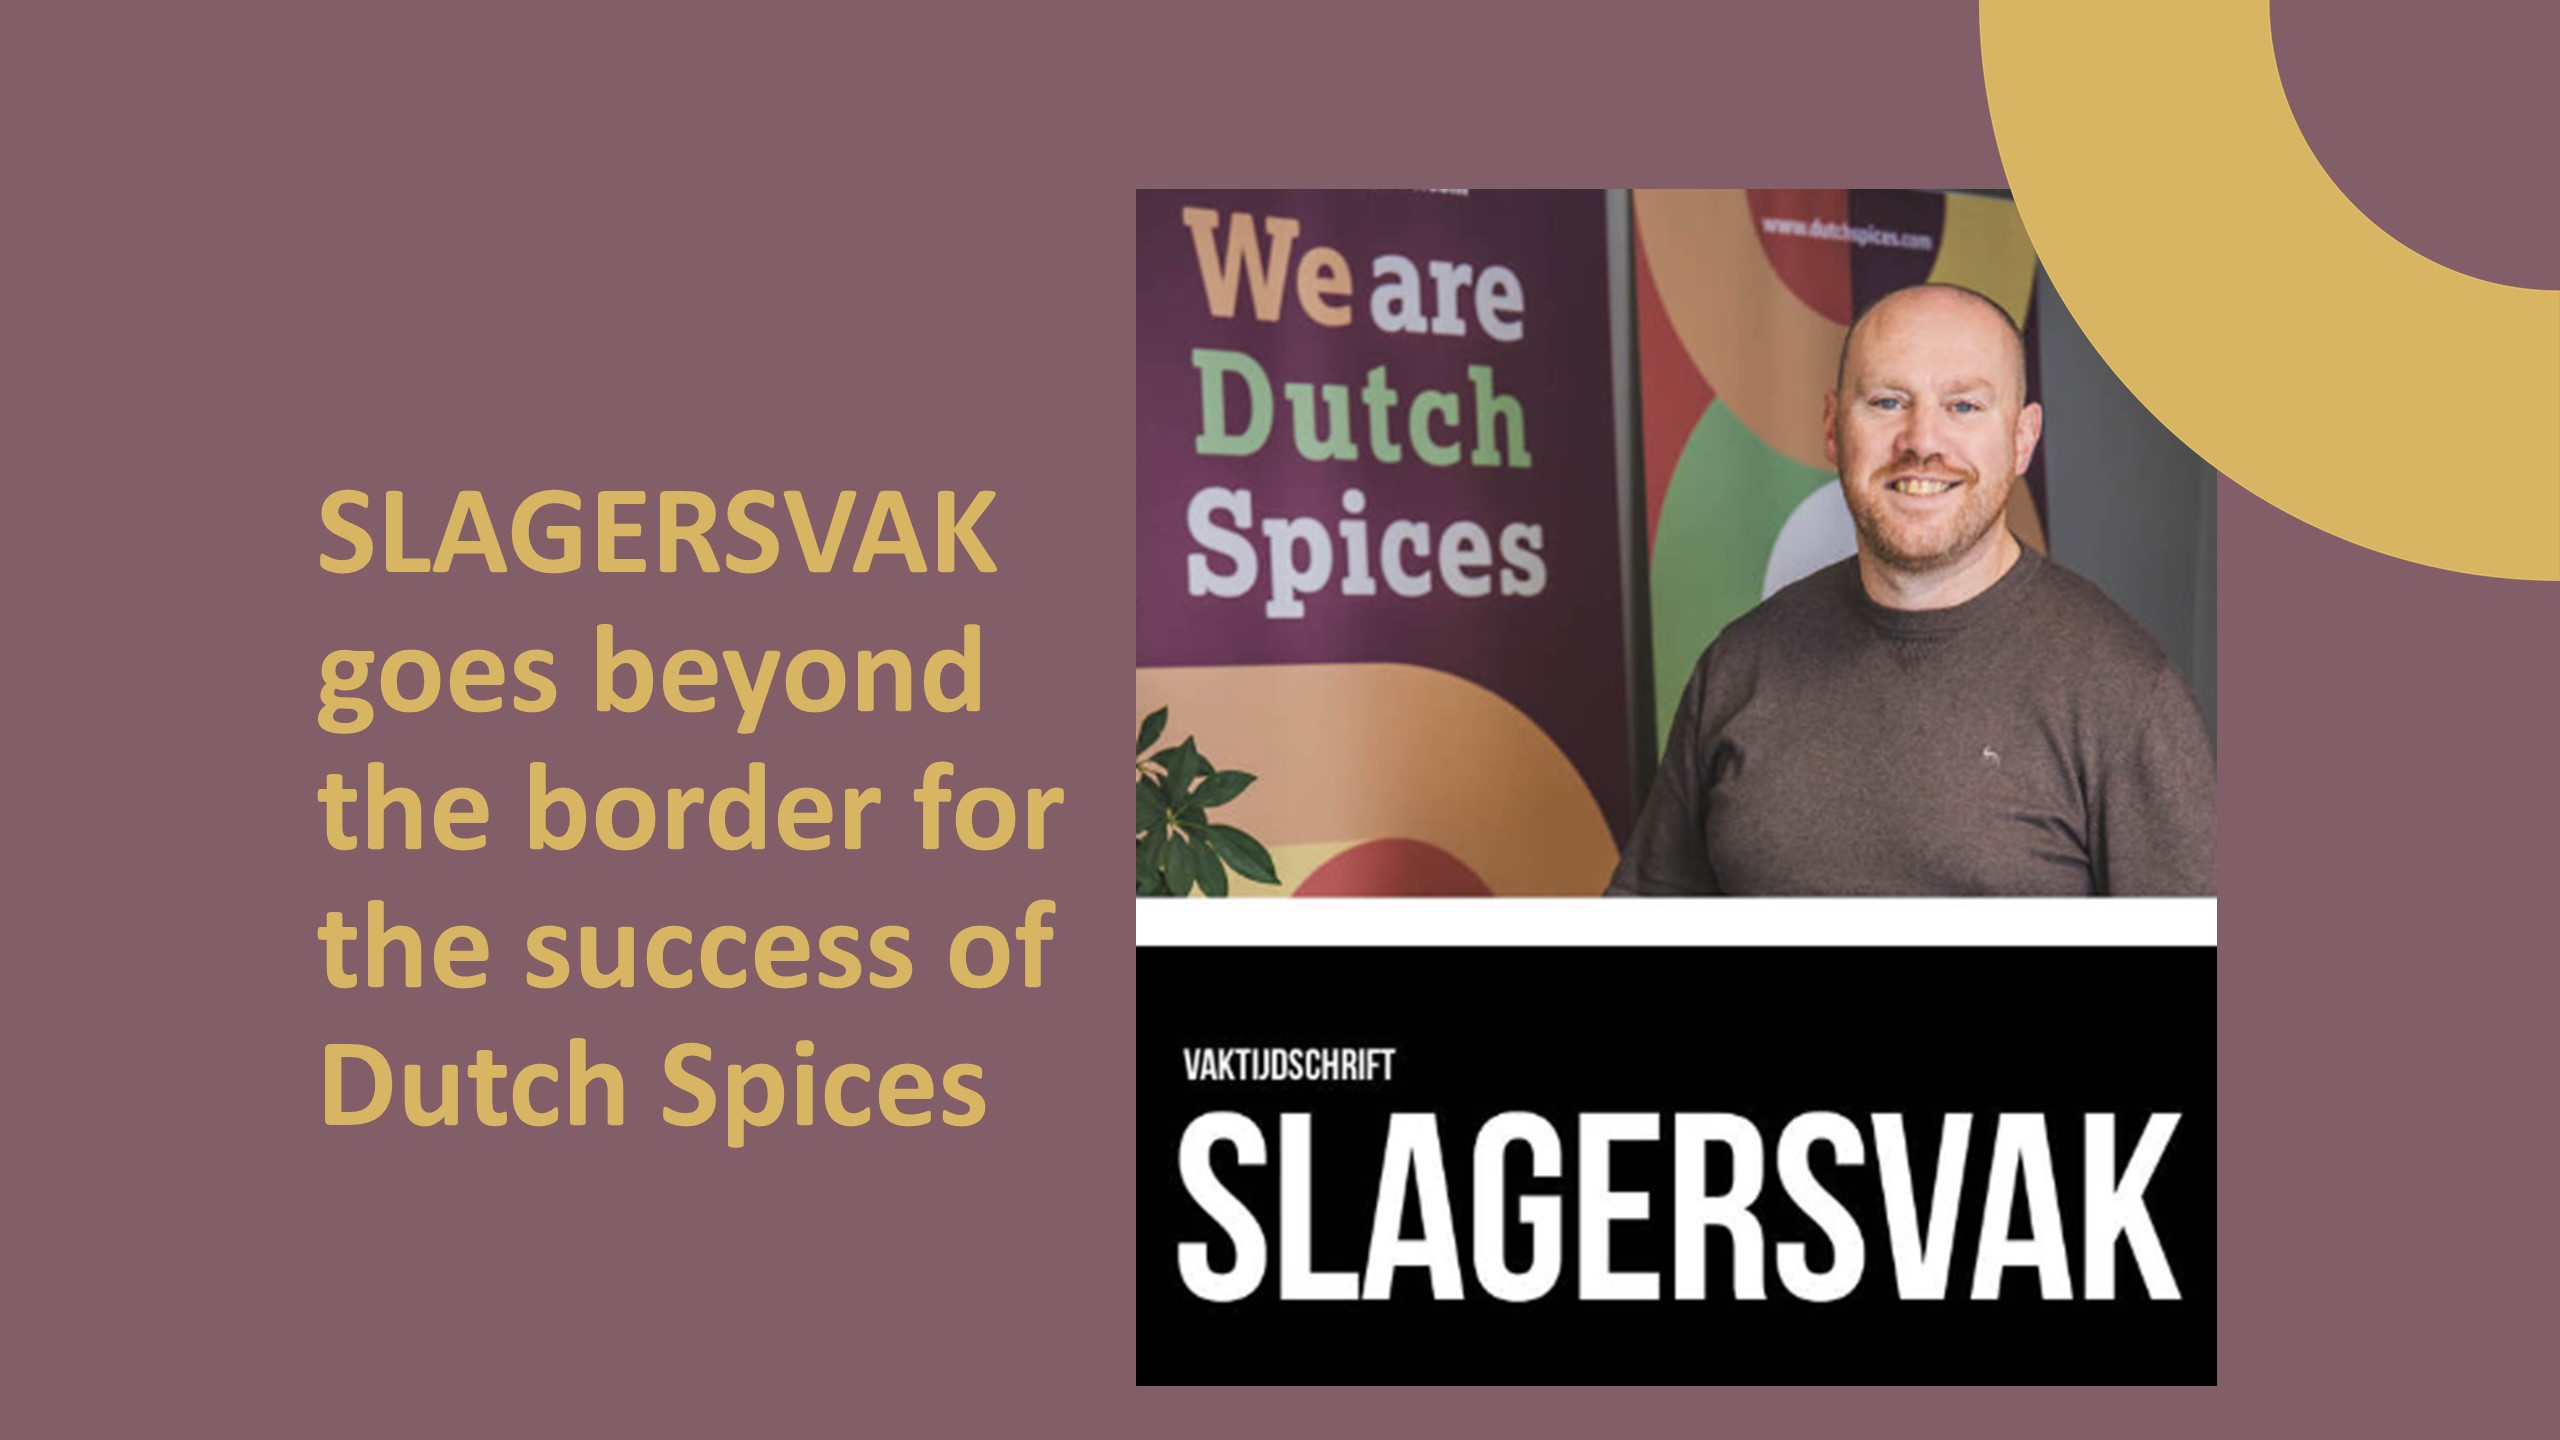 ‘In cooperation with Dutch Spices I want to inspire other butchers’